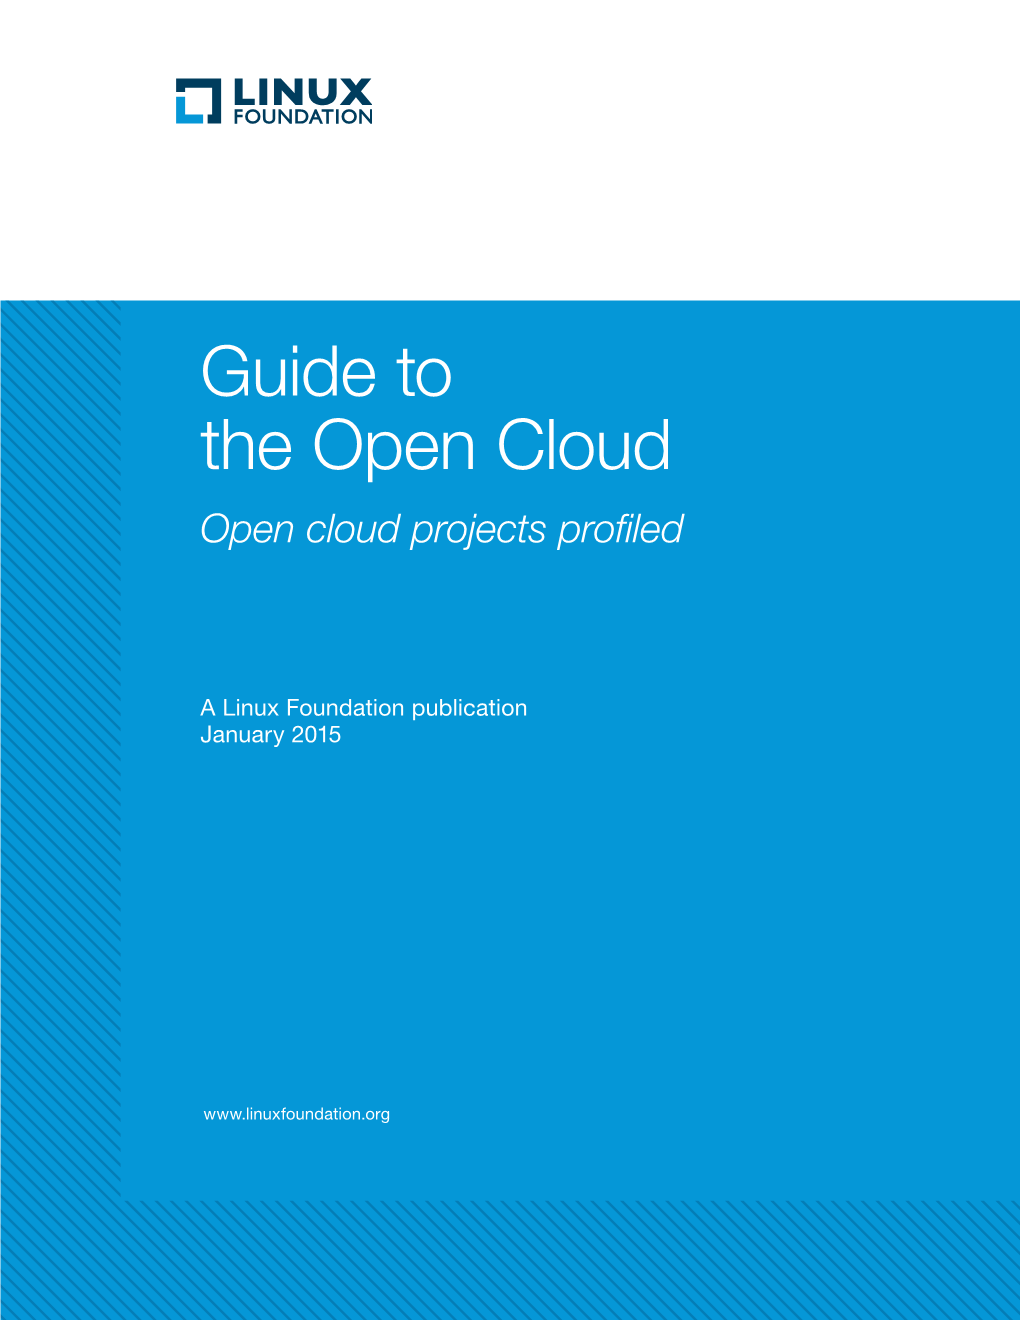 Guide to the Open Cloud Open Cloud Projects Profiled